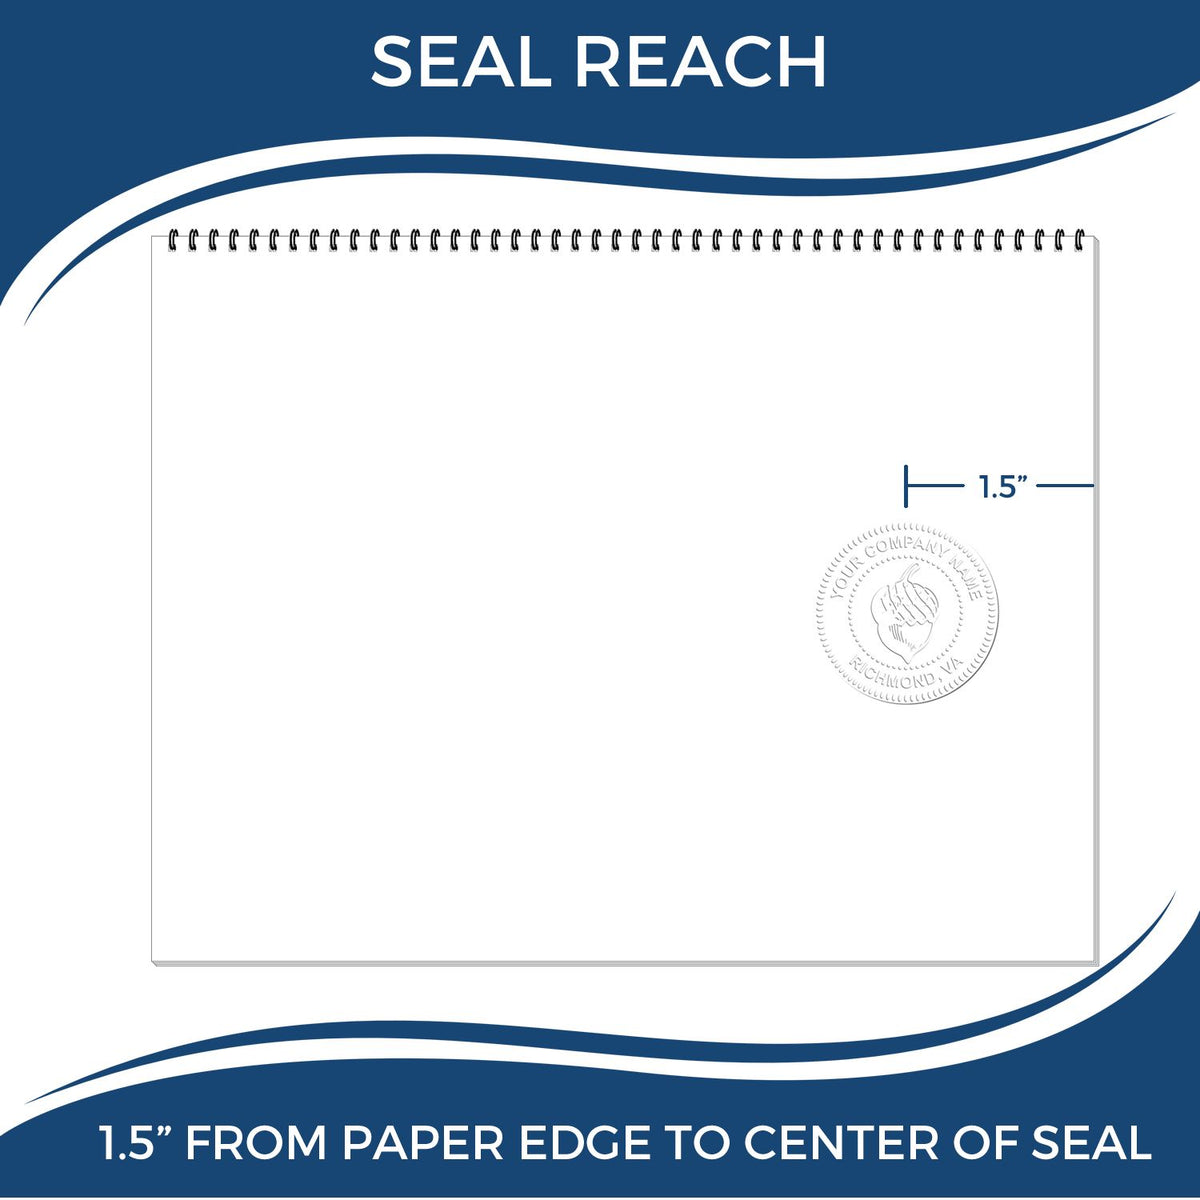 An infographic showing the seal reach which is represented by a ruler and a miniature seal image of the Handheld Ohio Professional Geologist Embosser